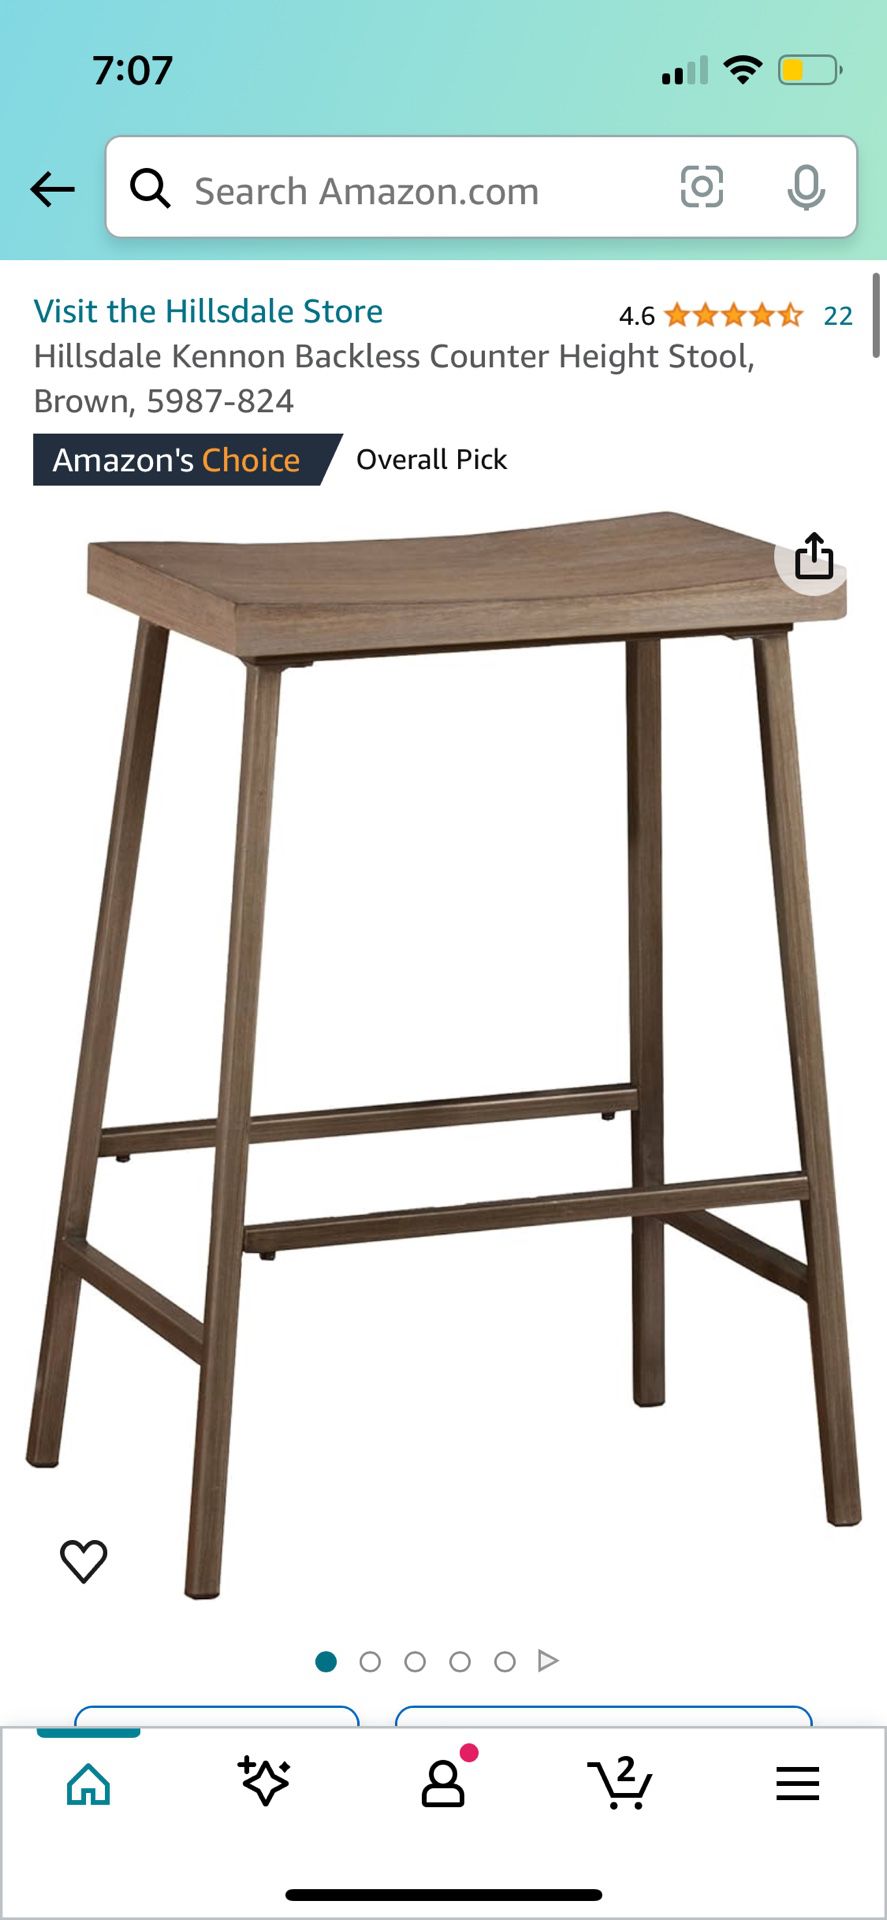 Wooden And Metal Counter Stool Seat